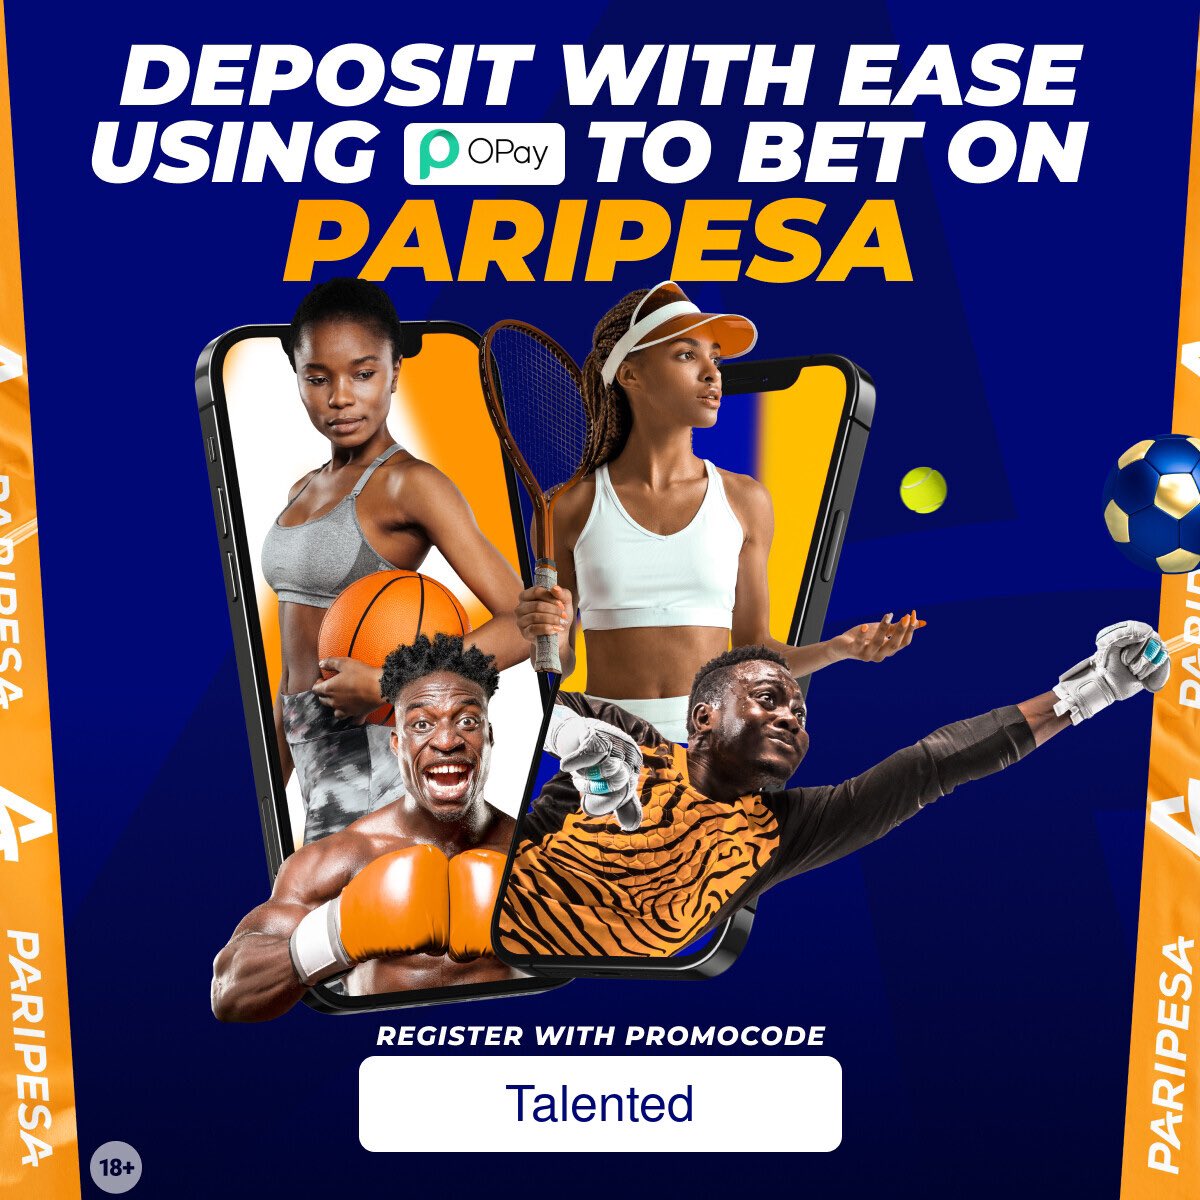 80 sharp odds on Paripesa ✅ 🏀🏀🏀 Stake and boom 4 million 🌍PARIPESA❤️ REGISTER & DEPOSIT PARIPESA HERE 👇👇👇 🌍 paripesa.bet/talentedtips Use Promo Code 👉🏽 TALENTED when registering to get a $300 bonus to play and withdraw 💰✅✅✅✅✅✅✅✅